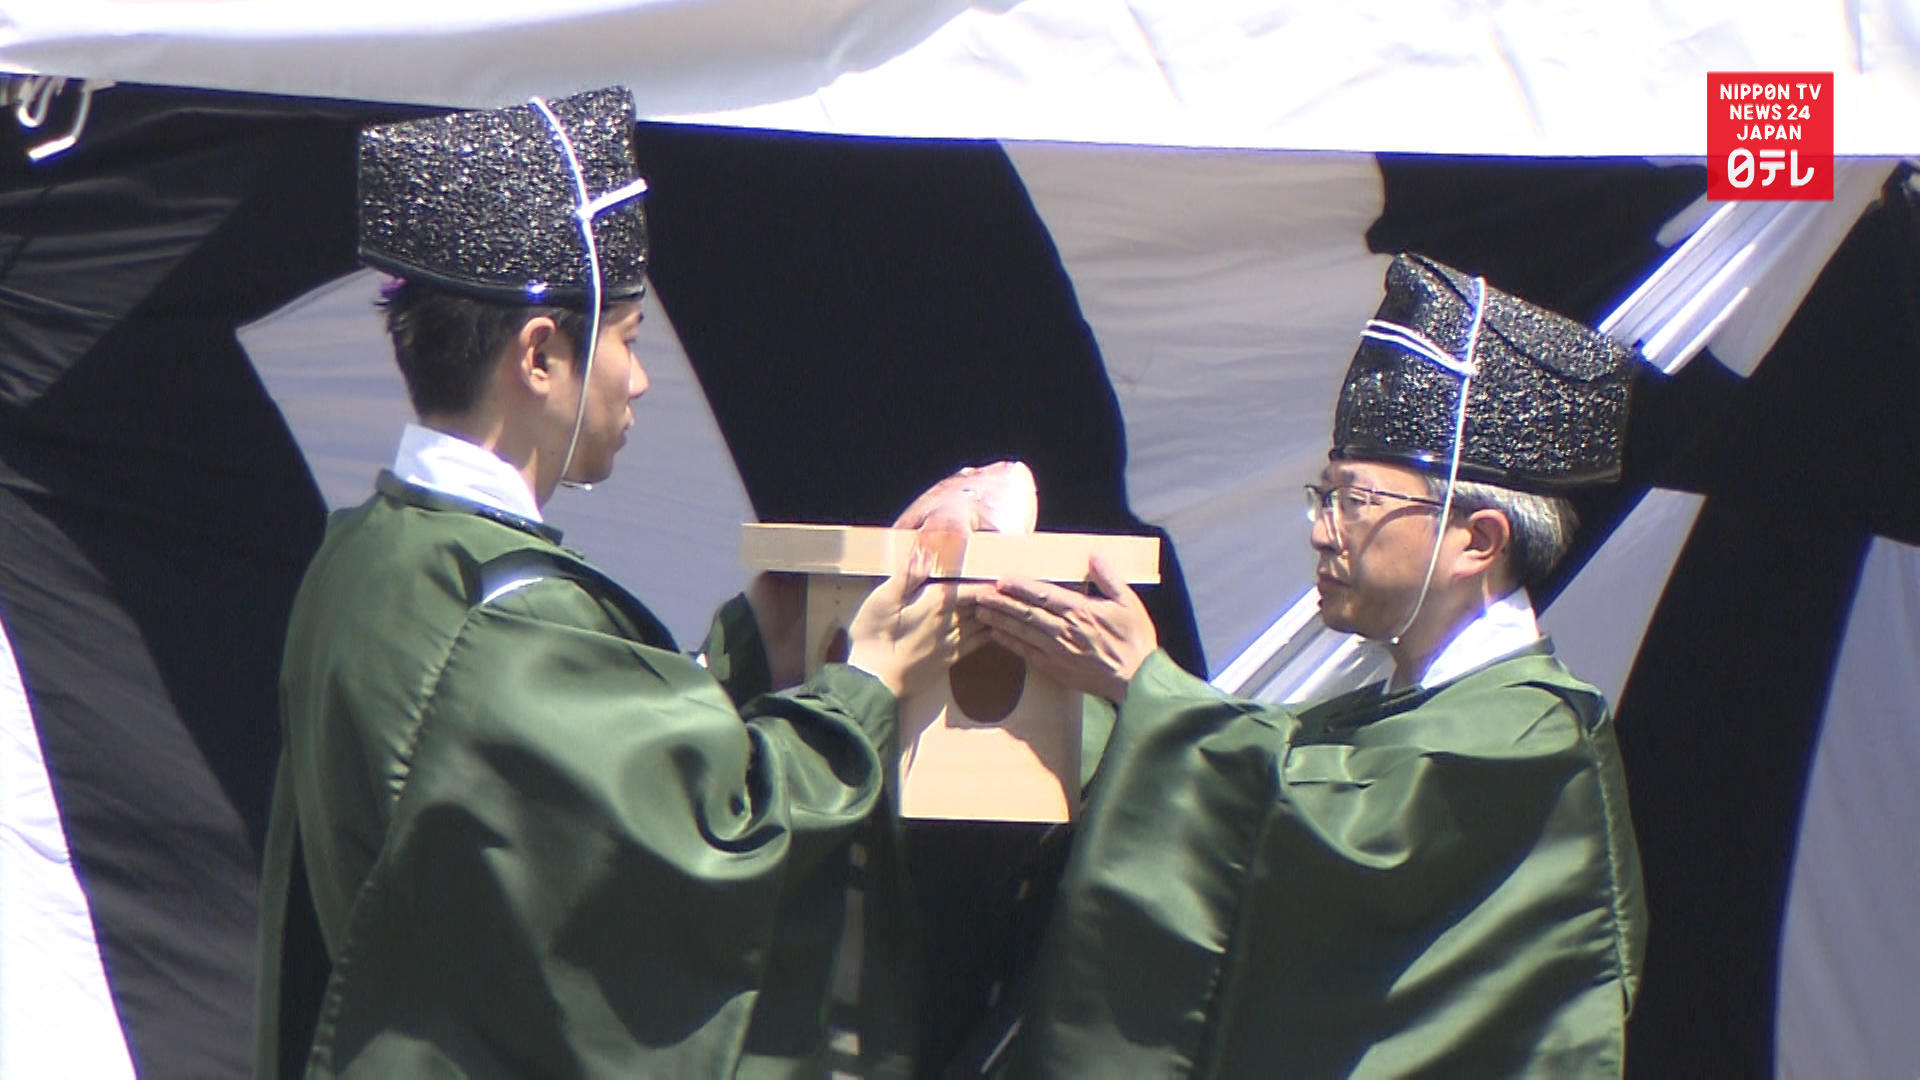 Purification rite held for complex at Imperial Palace